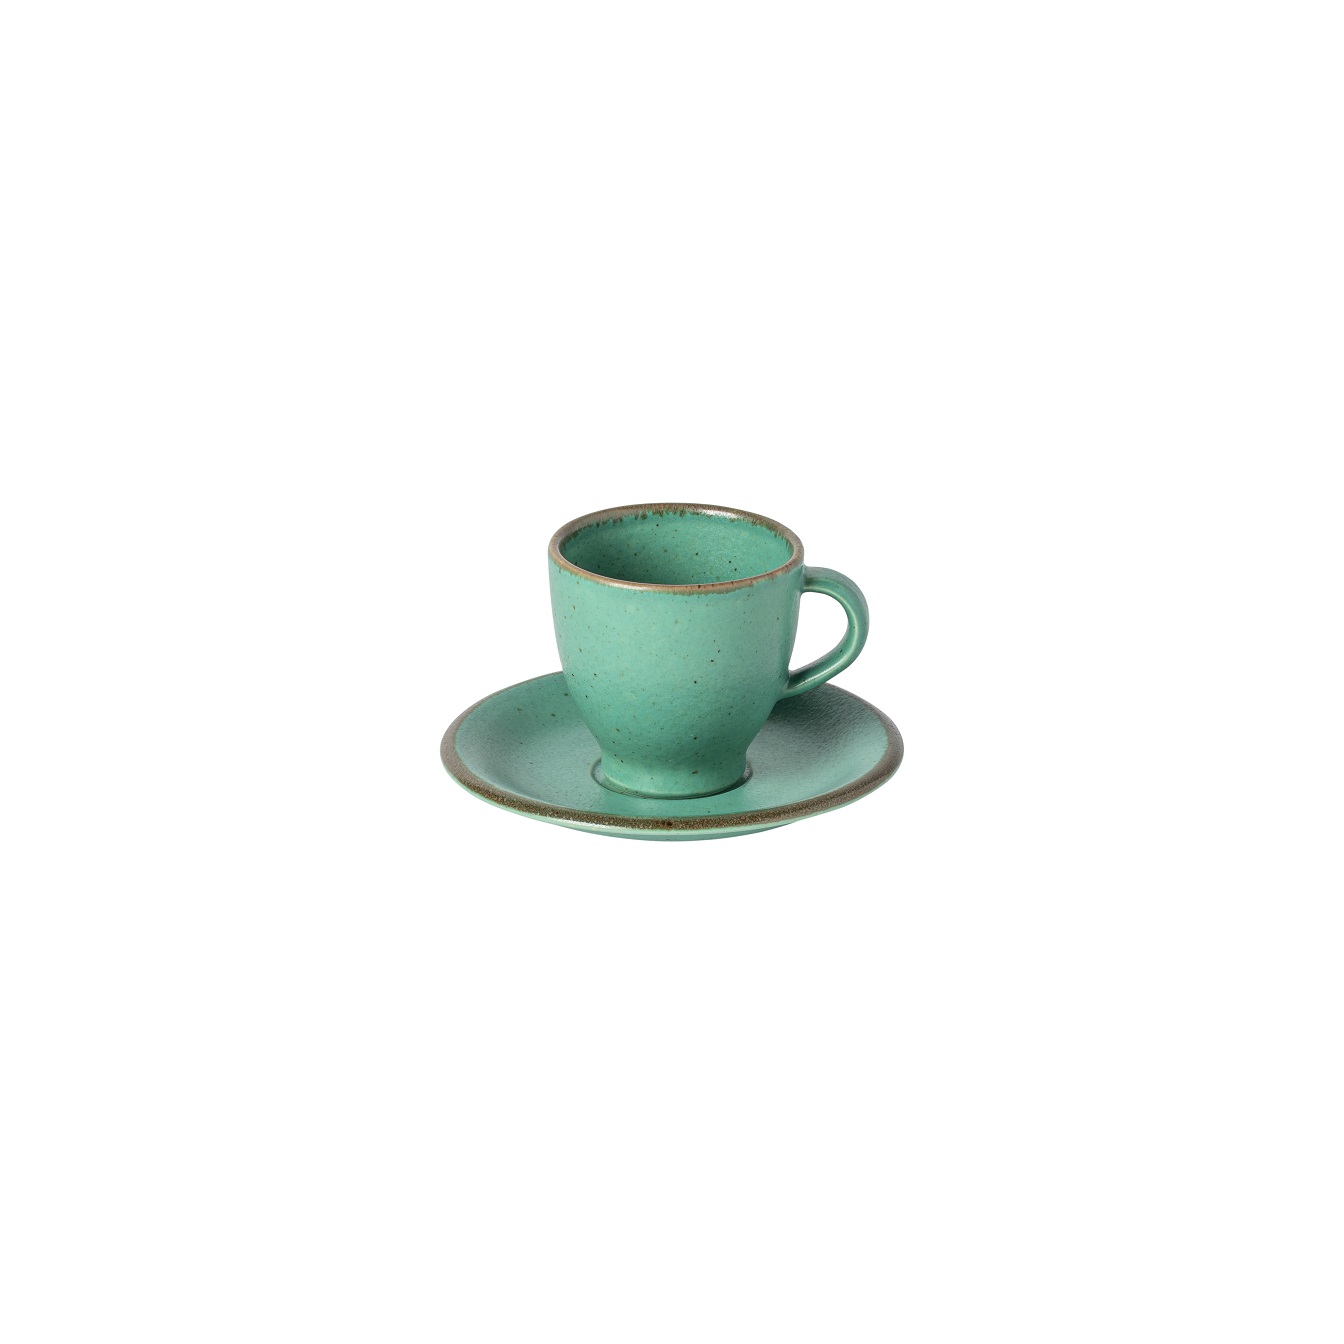 Positano Aloe Coffee Cup And Saucer 0.08l Gift